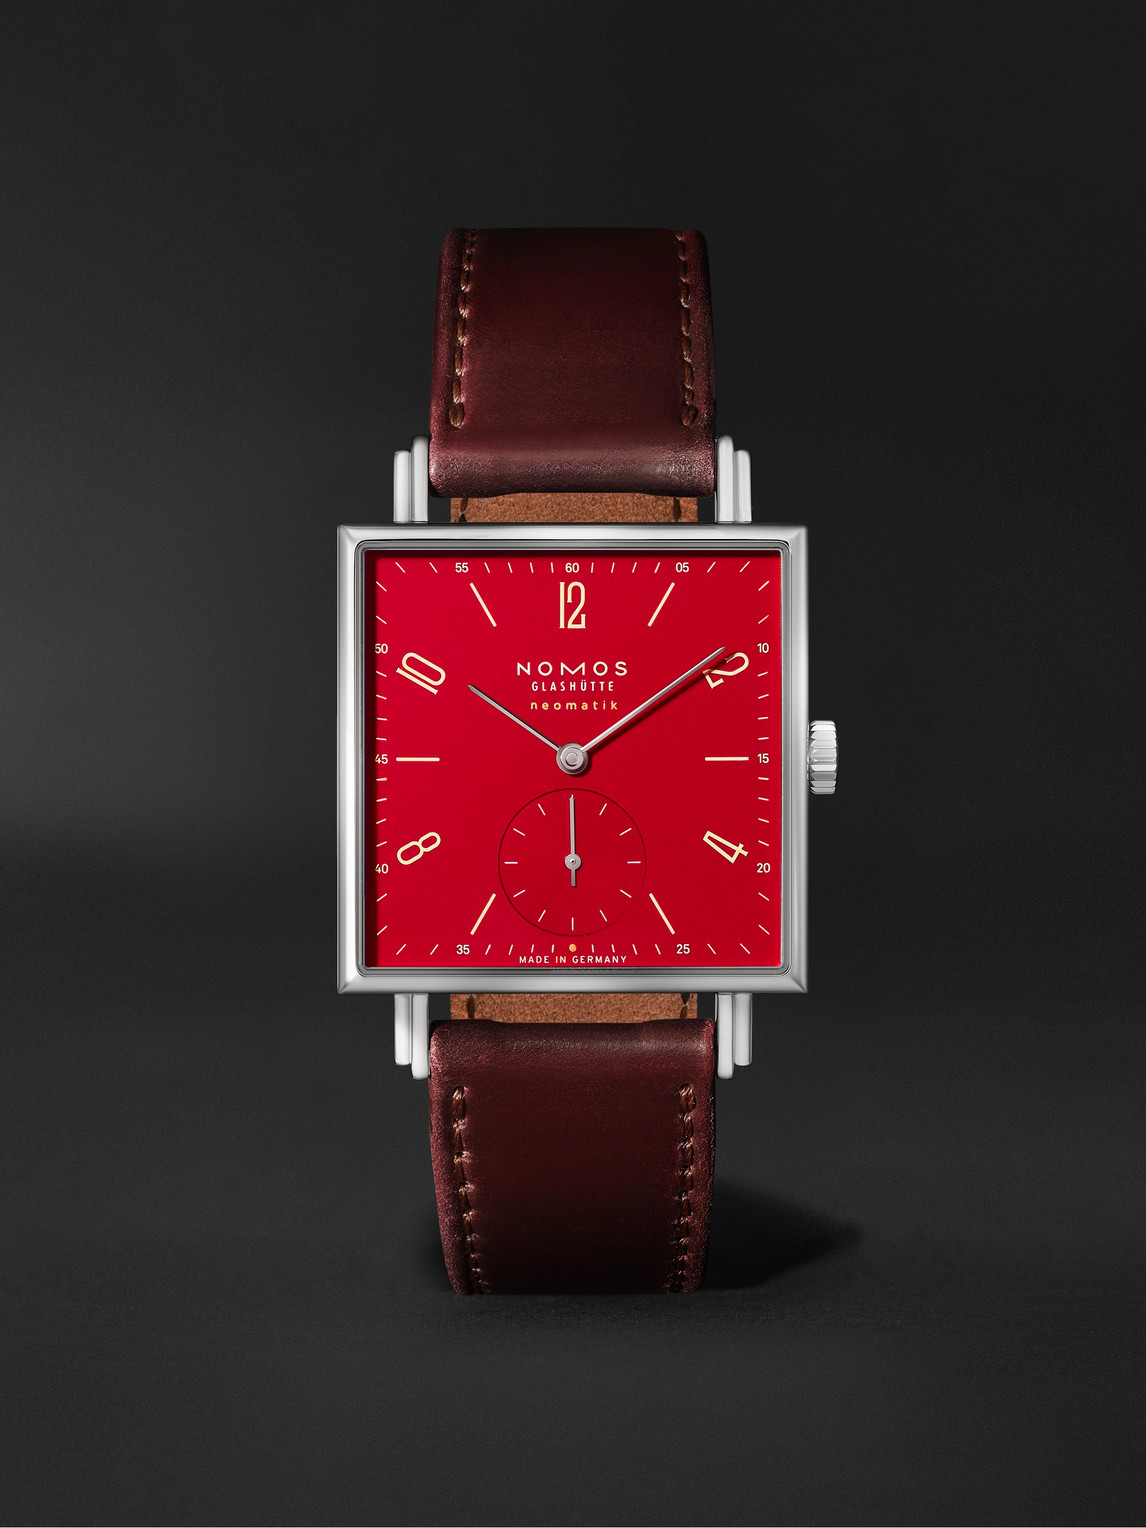 Nomos Glashütte Tetra Neomatik 39 Automatic 46mm Stainless Steel And Leather Watch, Ref. No. 421.s2 In Red